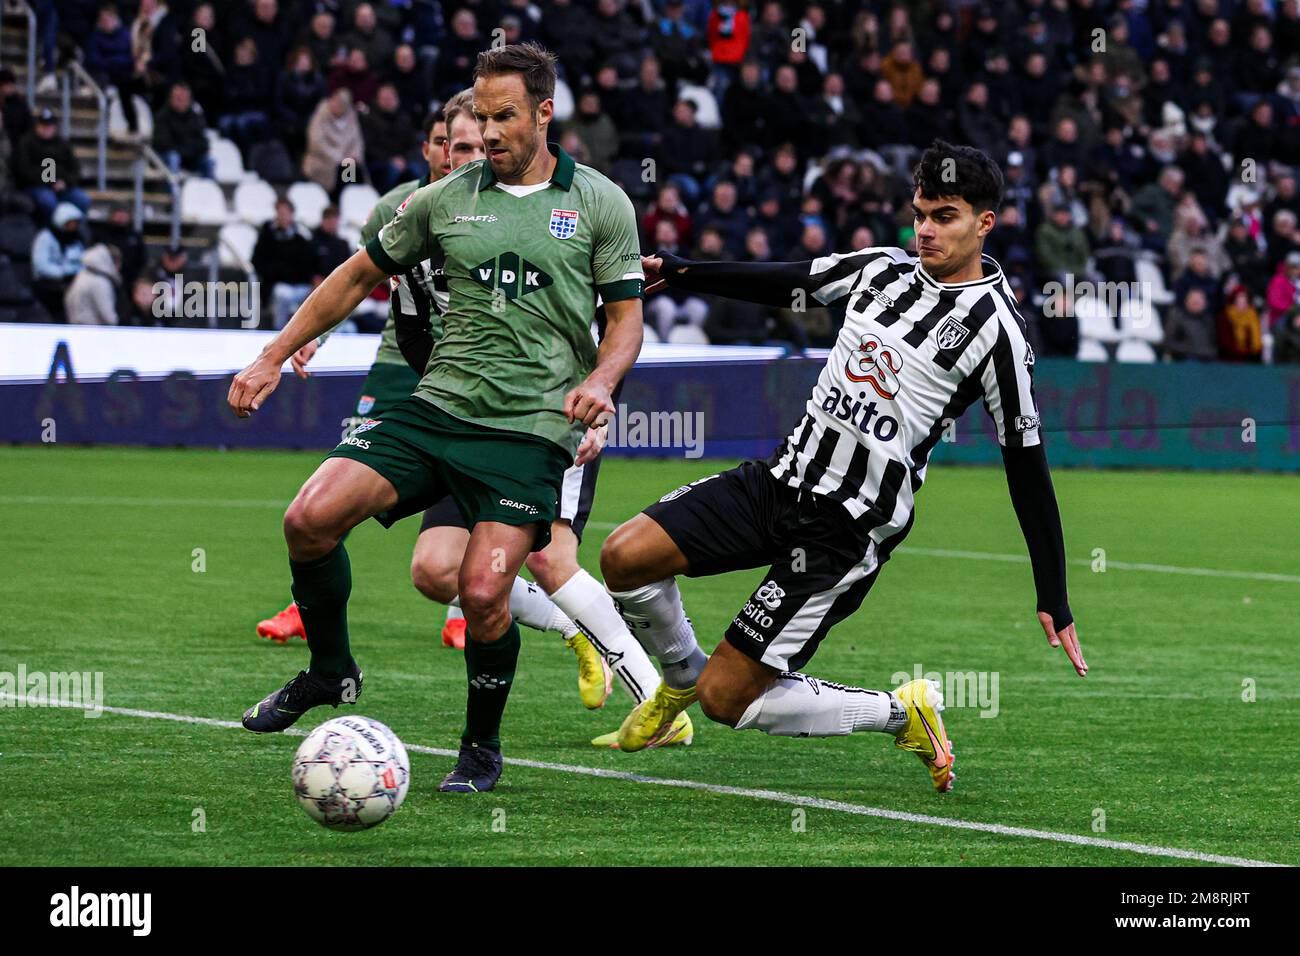 ALMELO, NETHERLANDS - JANUARY 15: Antonio Satriano of Heracles Almelo during the Dutch Keukenkampioendivisie match between Heracles Almelo and PEC Zwolle at Erve Asito on January 15, 2023 in Almelo, Netherlands (Photo by Marcel ter Bals/Orange Pictures) Credit: Orange Pics BV/Alamy Live News Stock Photo